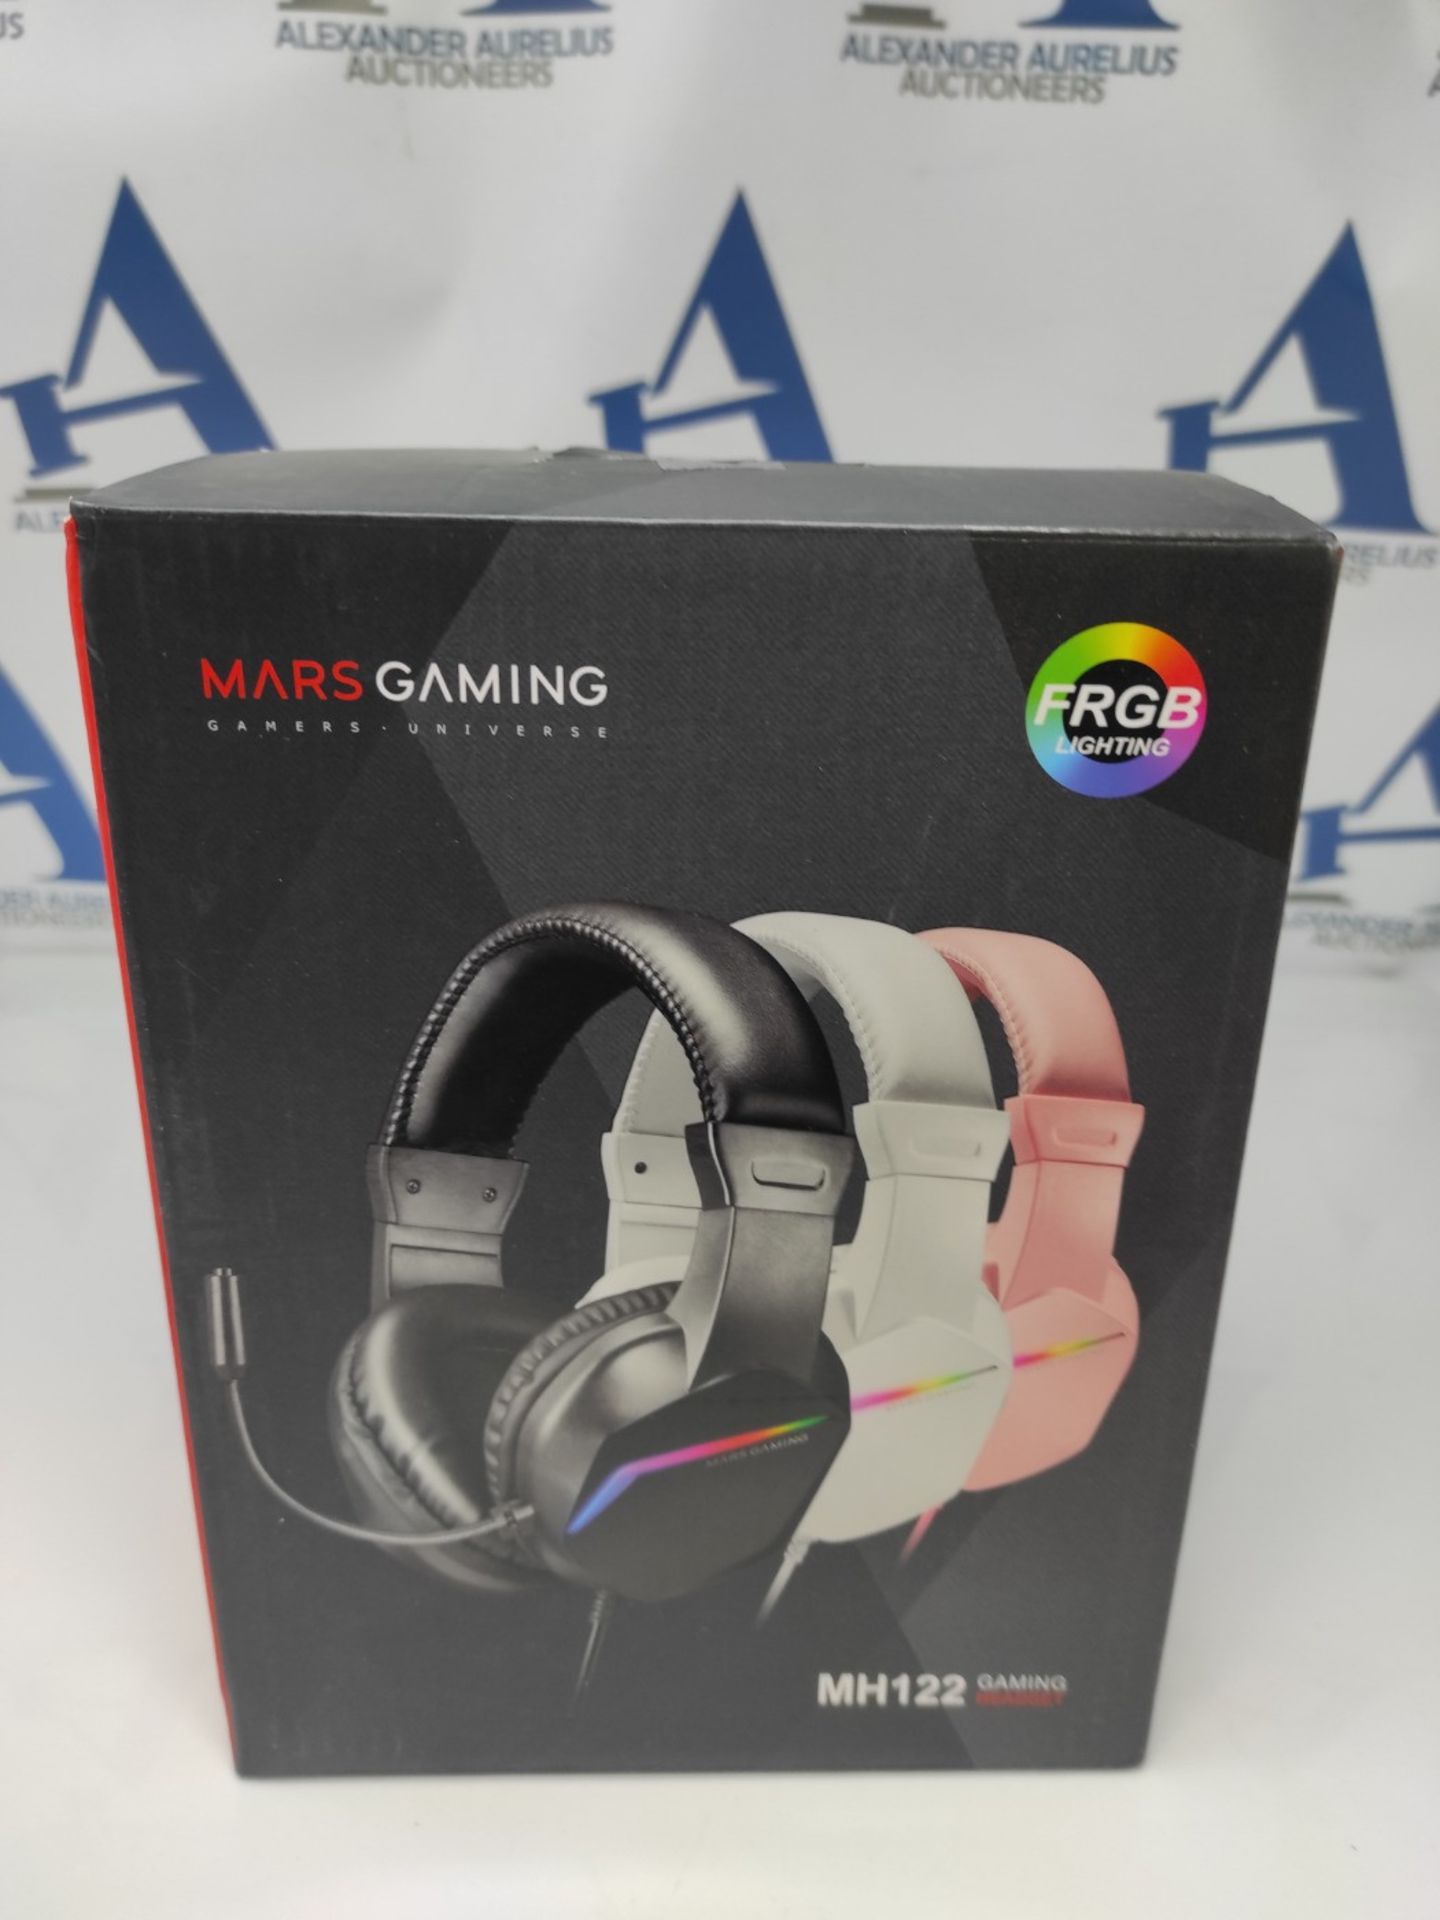 MARSGAMING MH122P MH122, Gaming Headset FRGB Over Ear with Microphone, HiFi Sound, Sou - Image 2 of 6